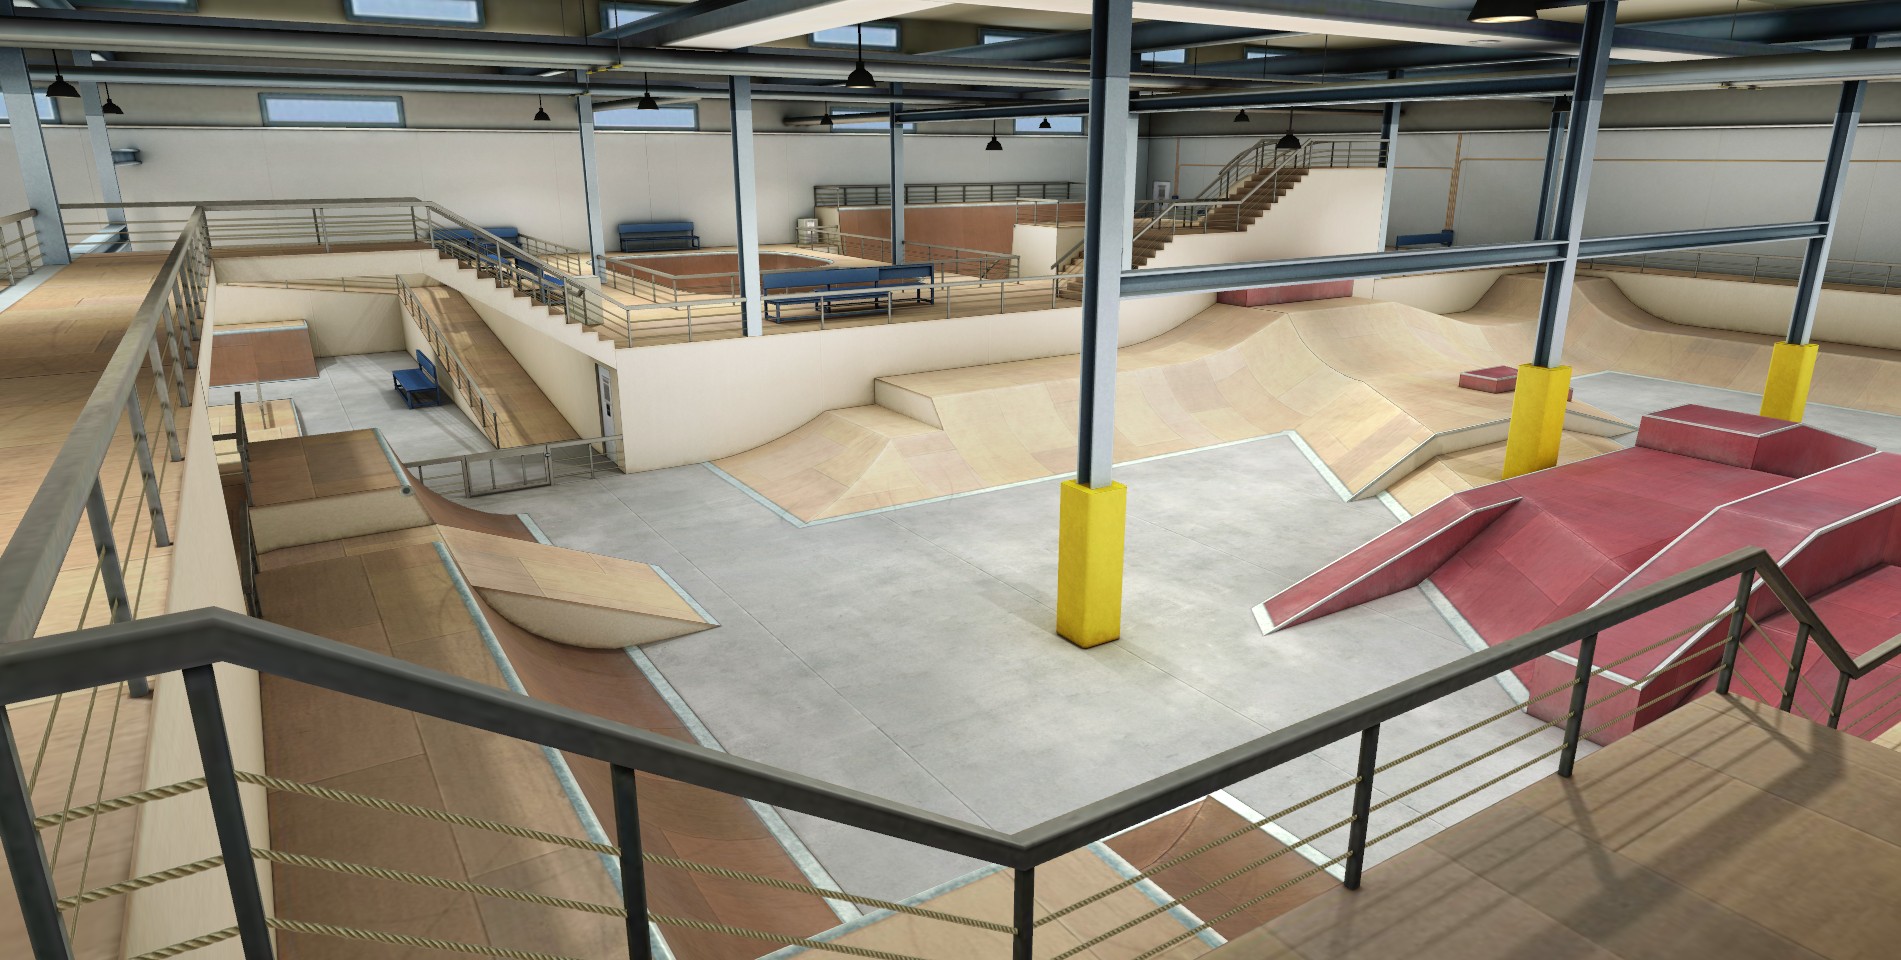 This Realistic Skate Game Just Got A REALLY GOOD UPDATE! - True